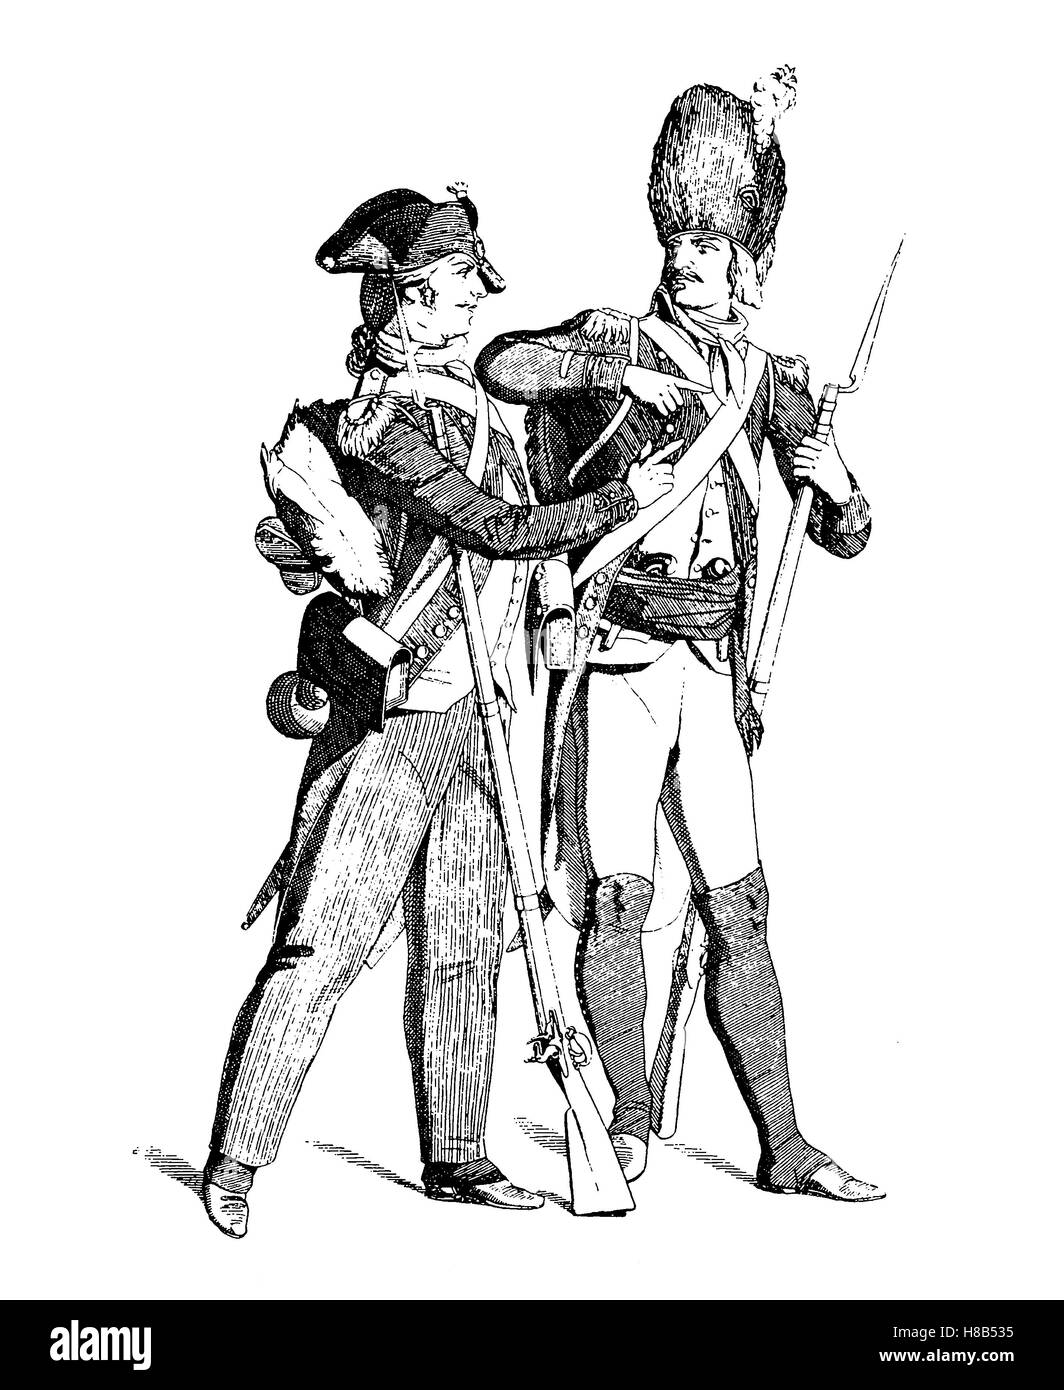 Soldiers of the french republik, 1792 - 1799, History of fashion, costume story Stock Photo